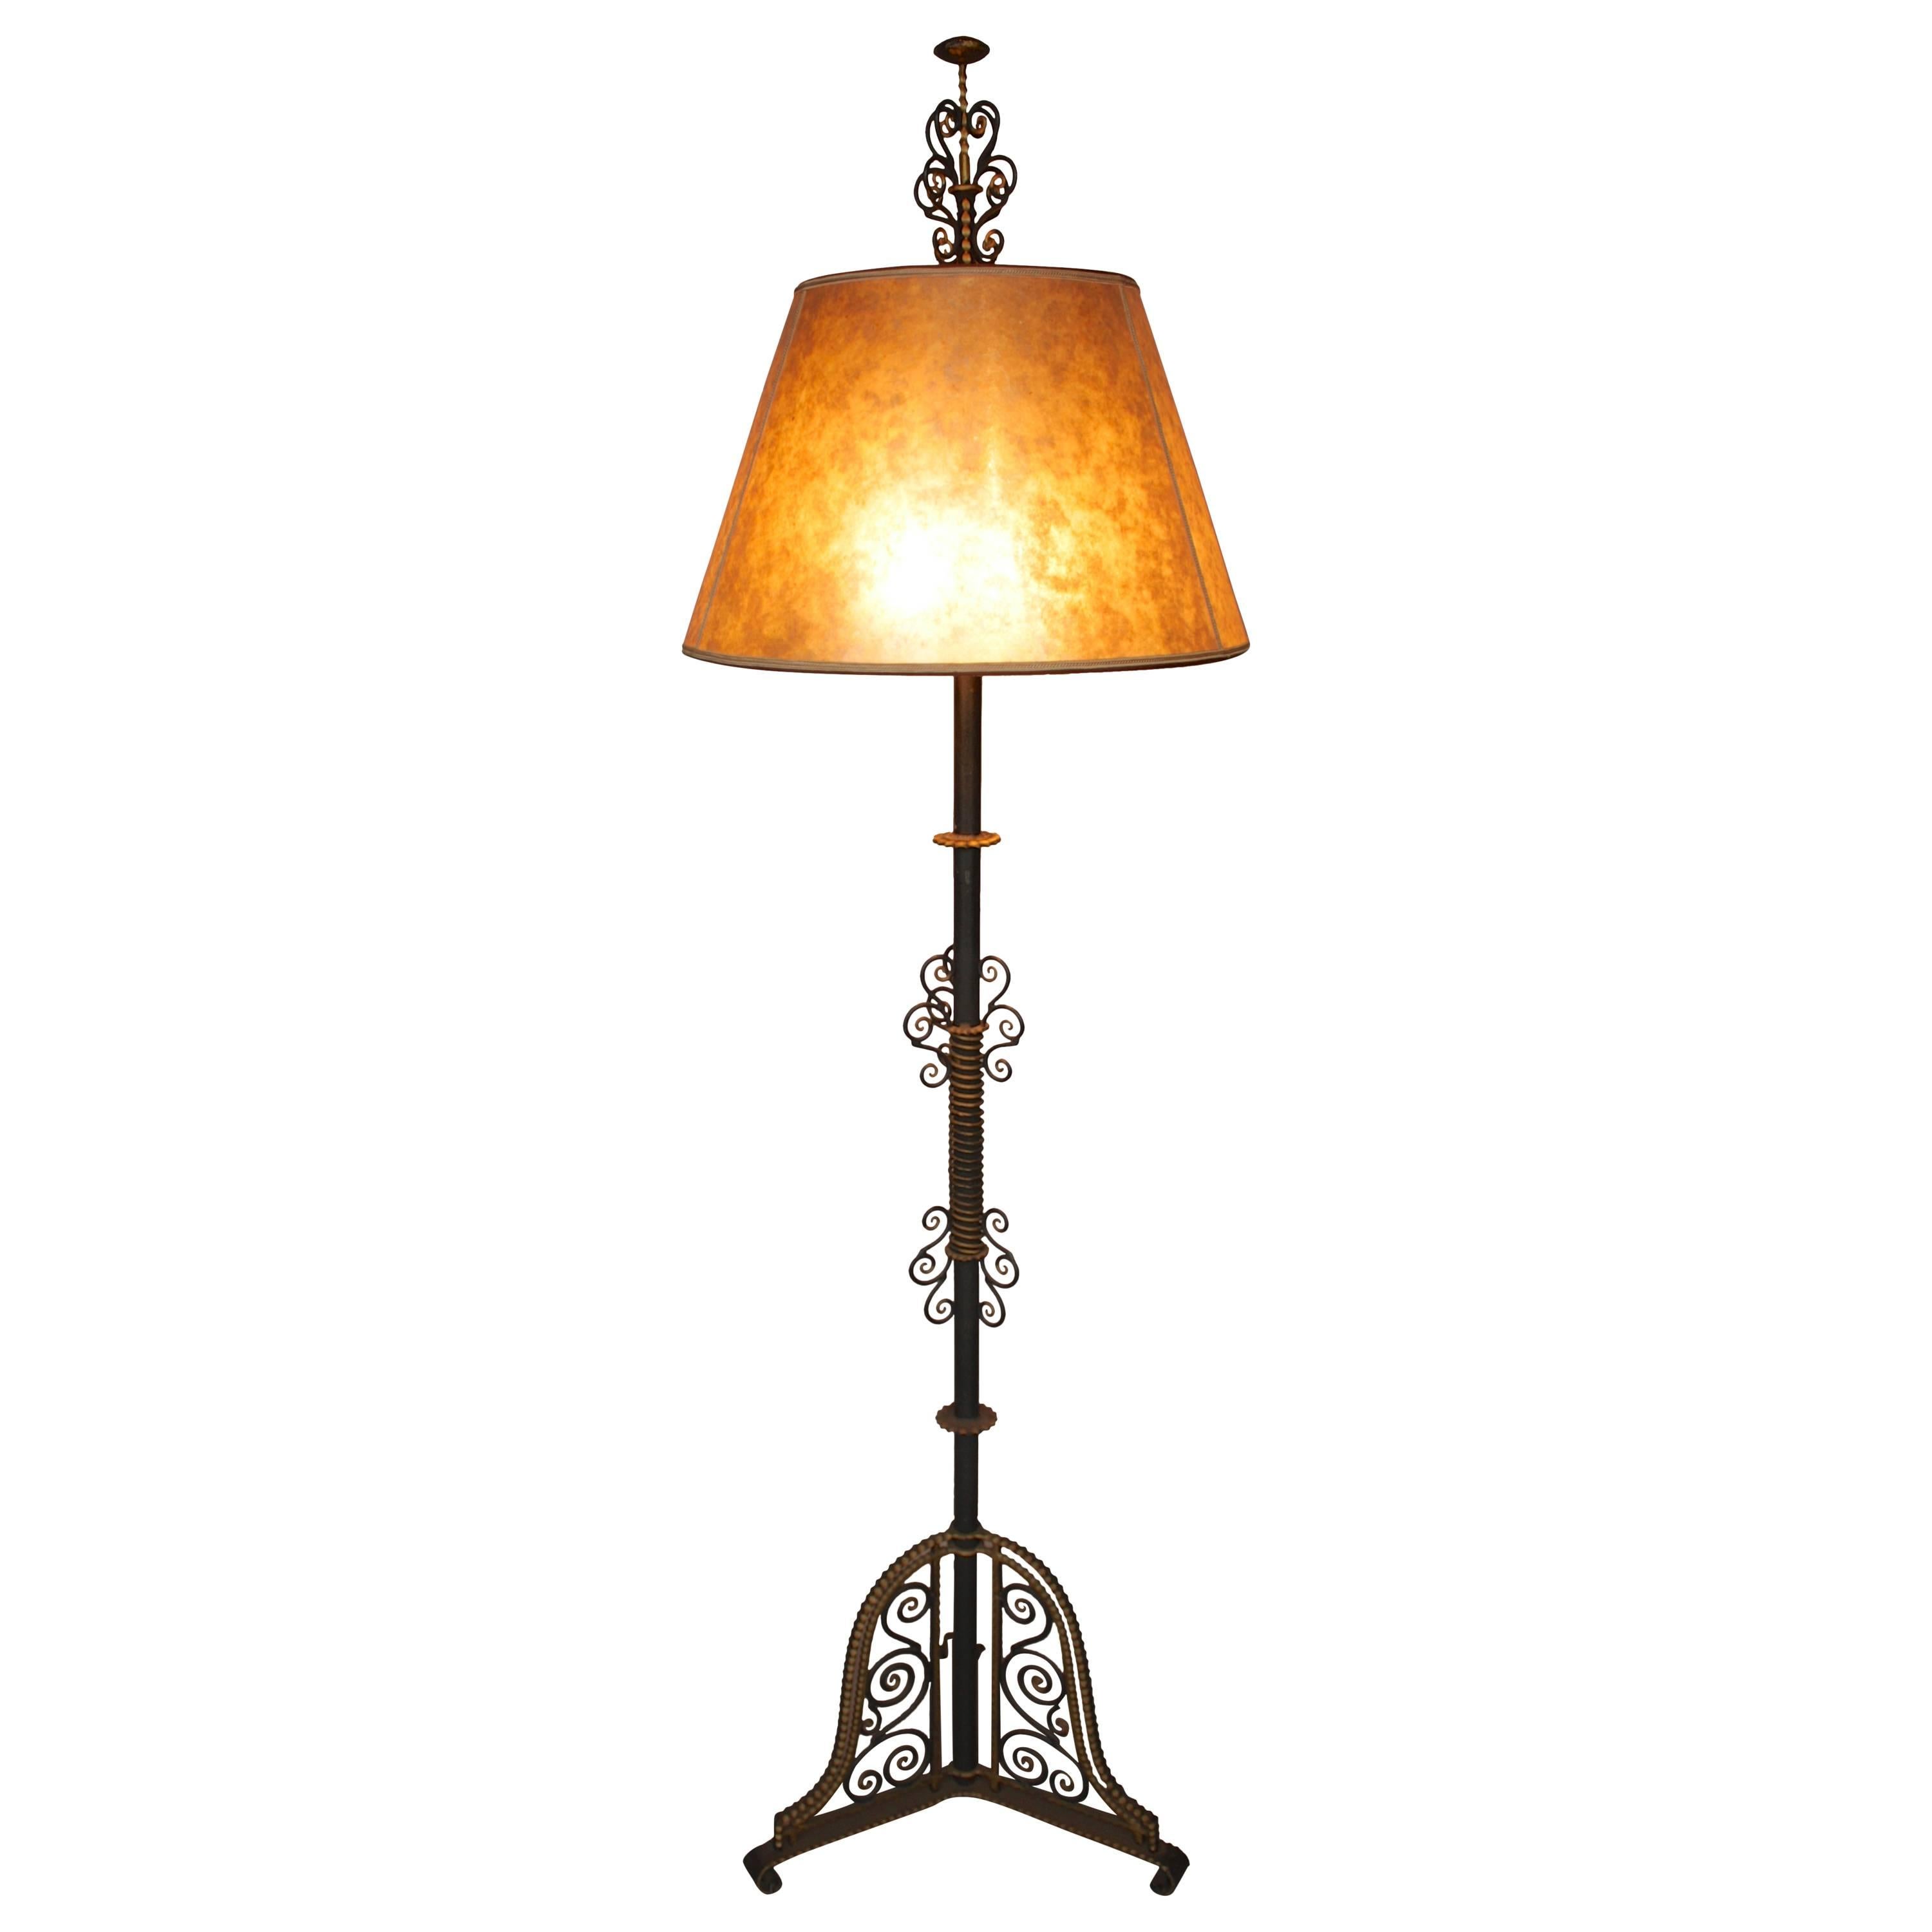 Spectacular Large Scale 1920's Spanish Revival Floor Lamp